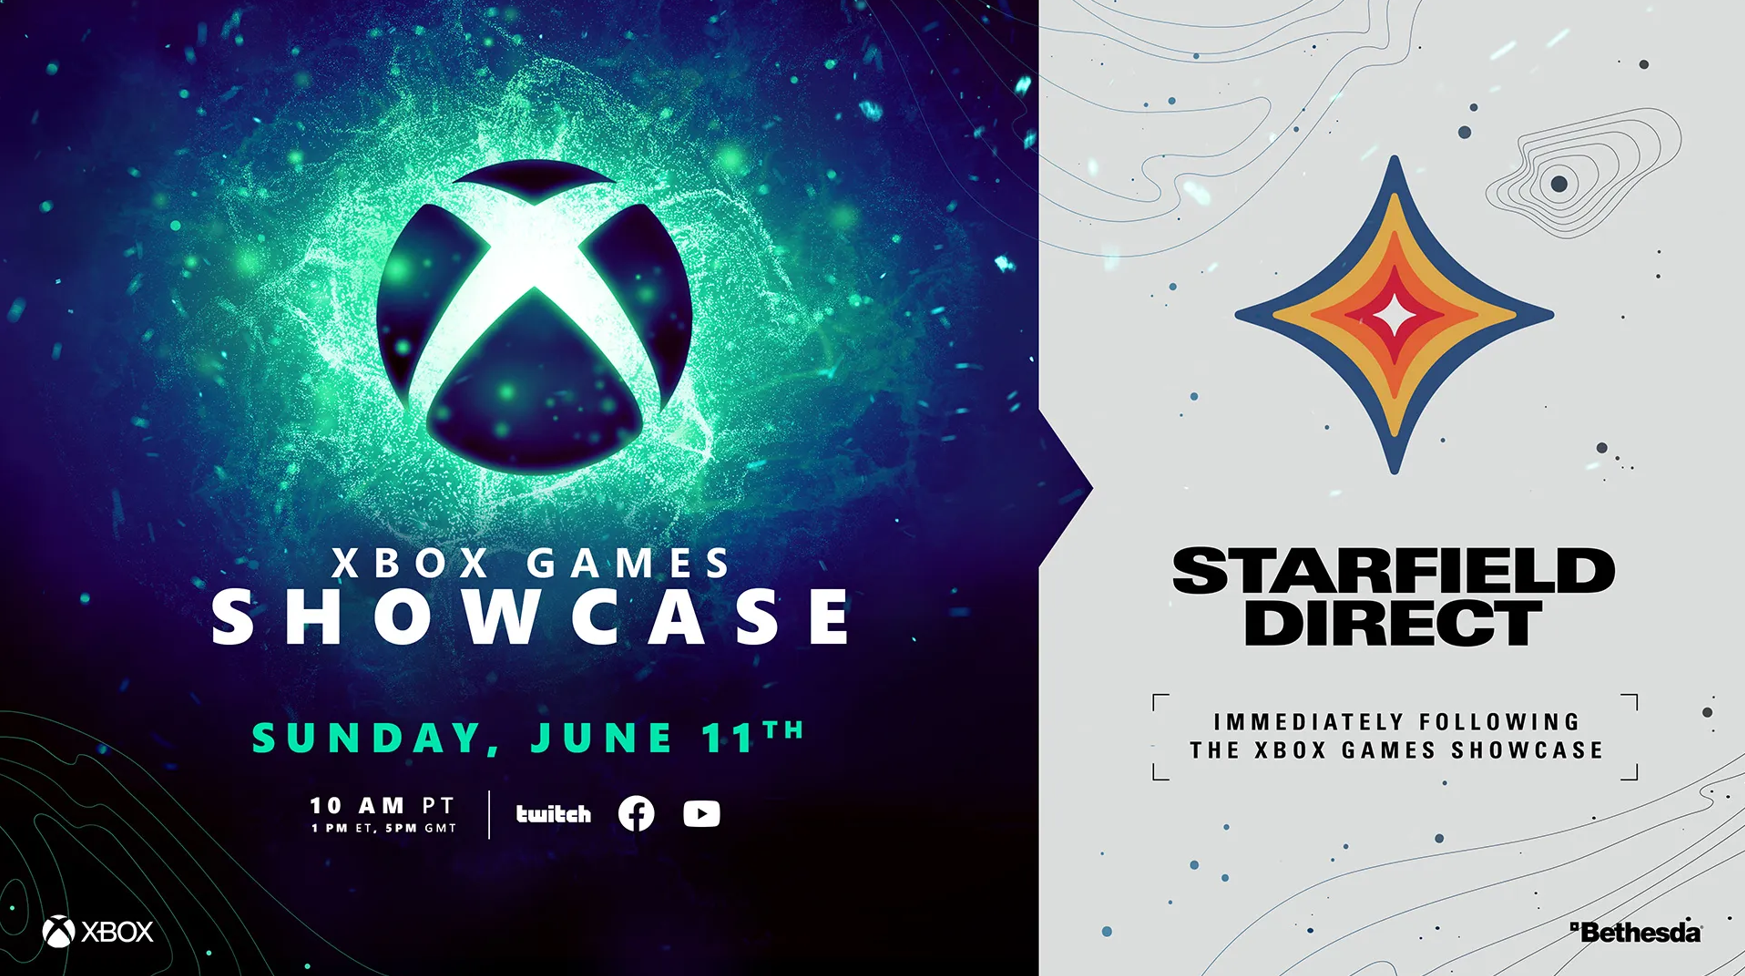 Xbox Games Showcase and Starfield Direct will take place on June 11 at 7:00 p.m. CEST